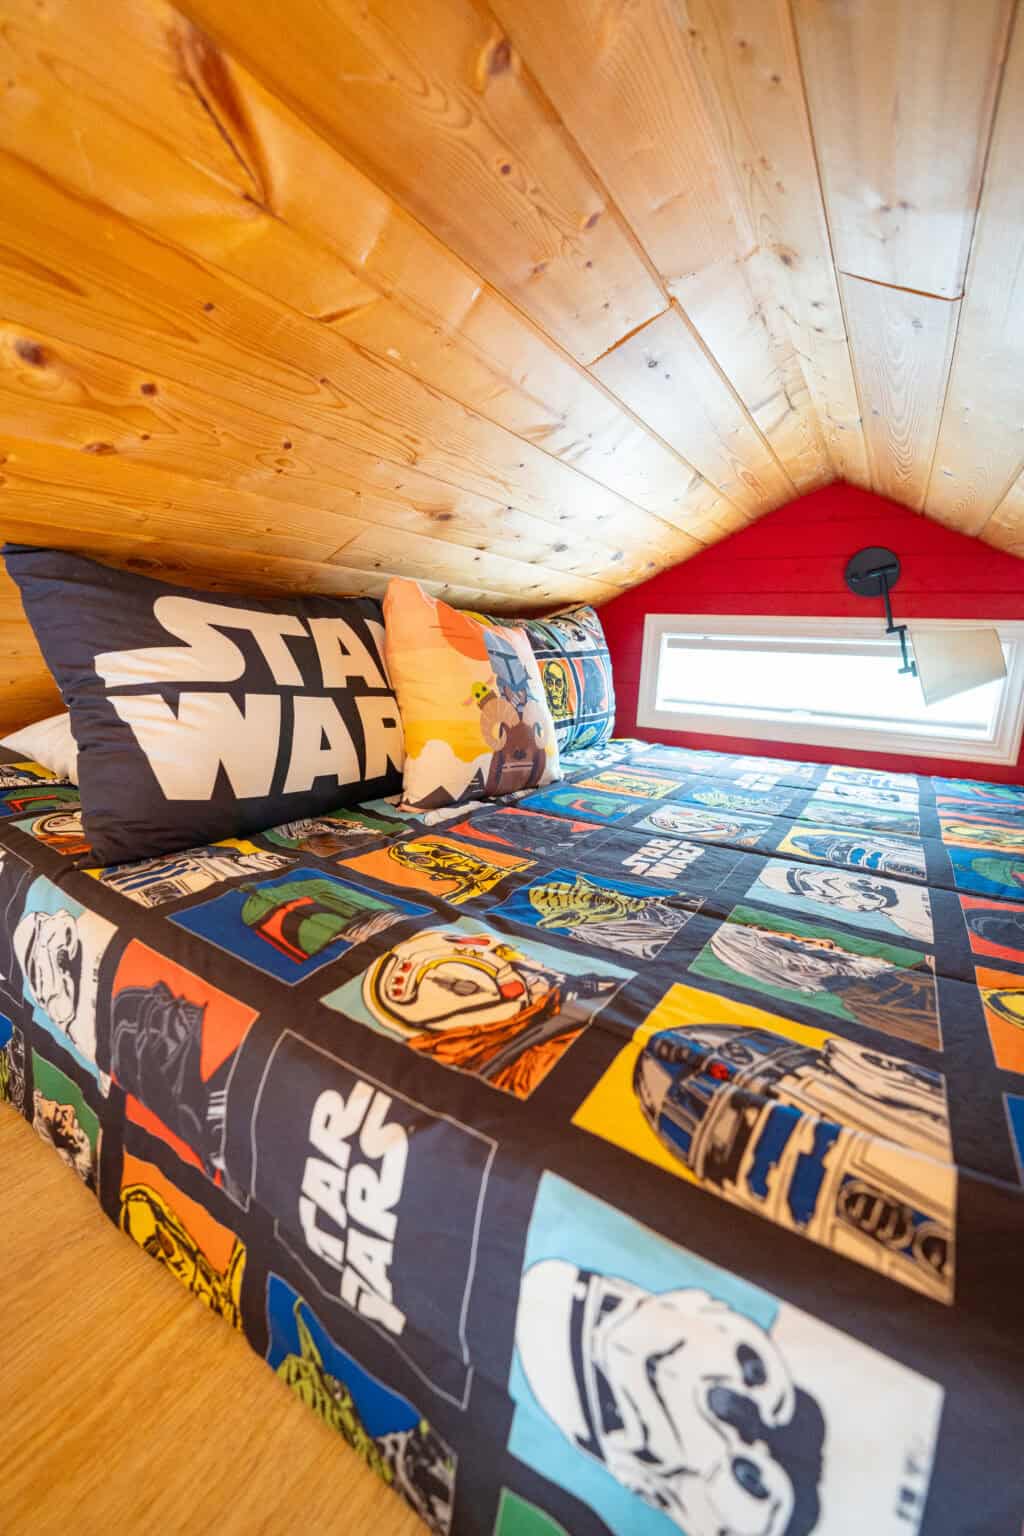 a bed with a star wars theme on it